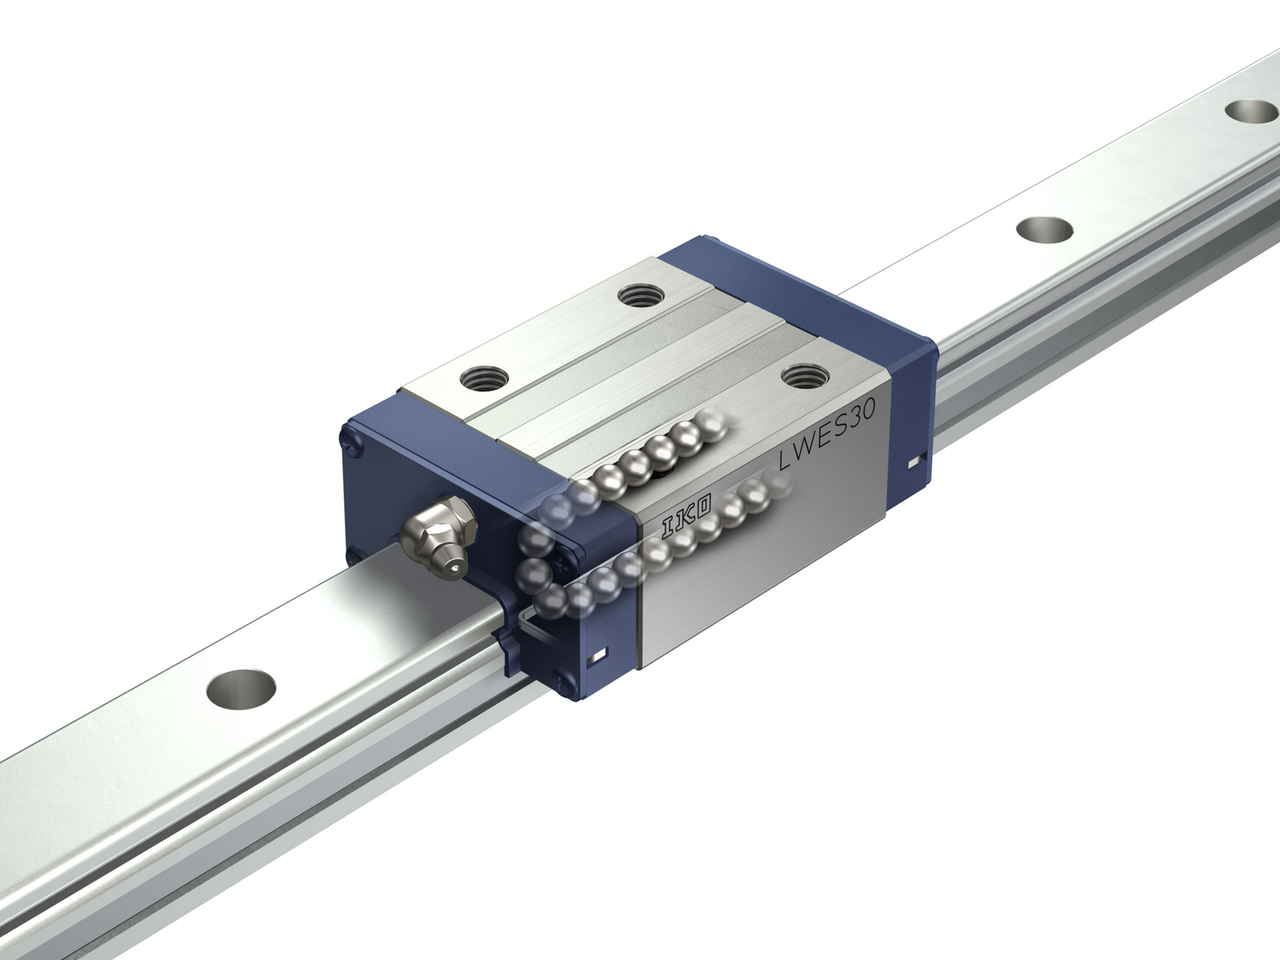 Details about   IKO LWES20 Precision Linear Ball Bearing Carriage Slides w/400mm Guide Rail 2x 